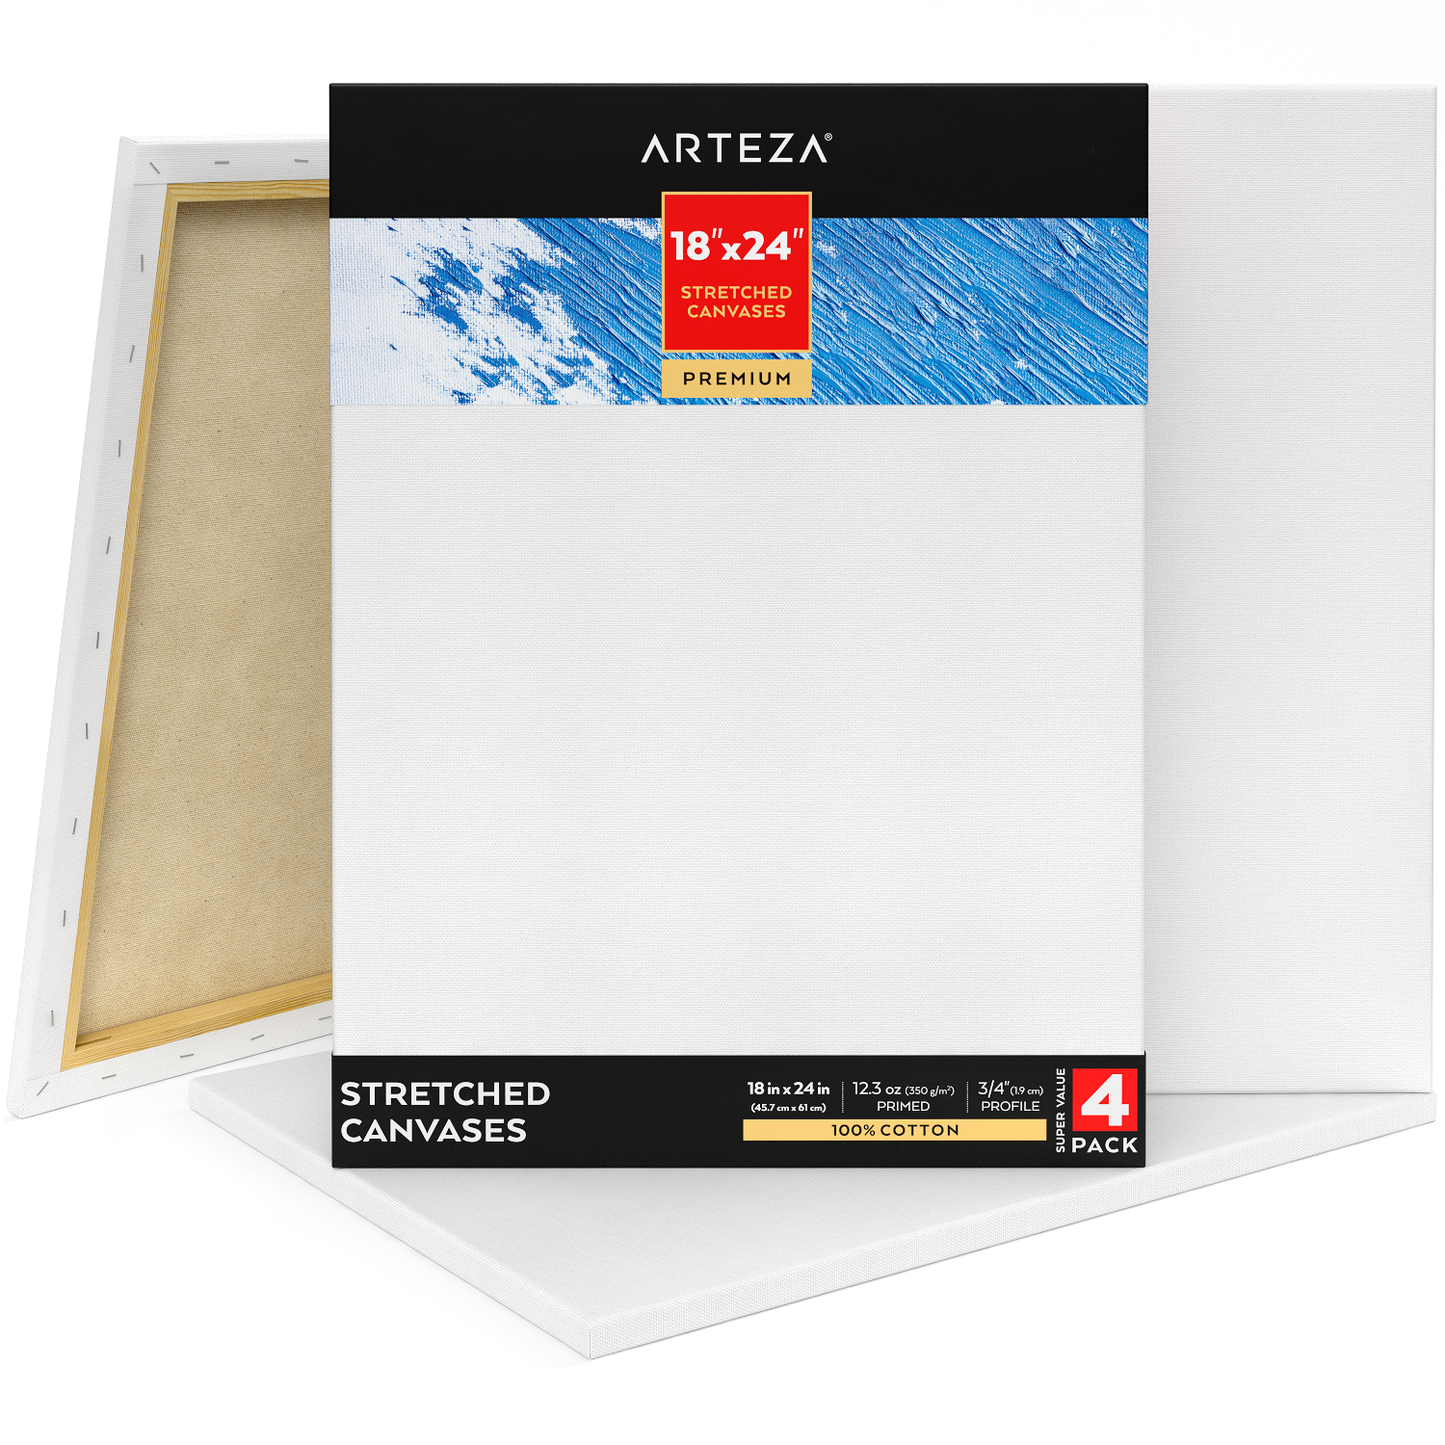 Premium Stretched Canvas, 18" x 24" - Pack of 4